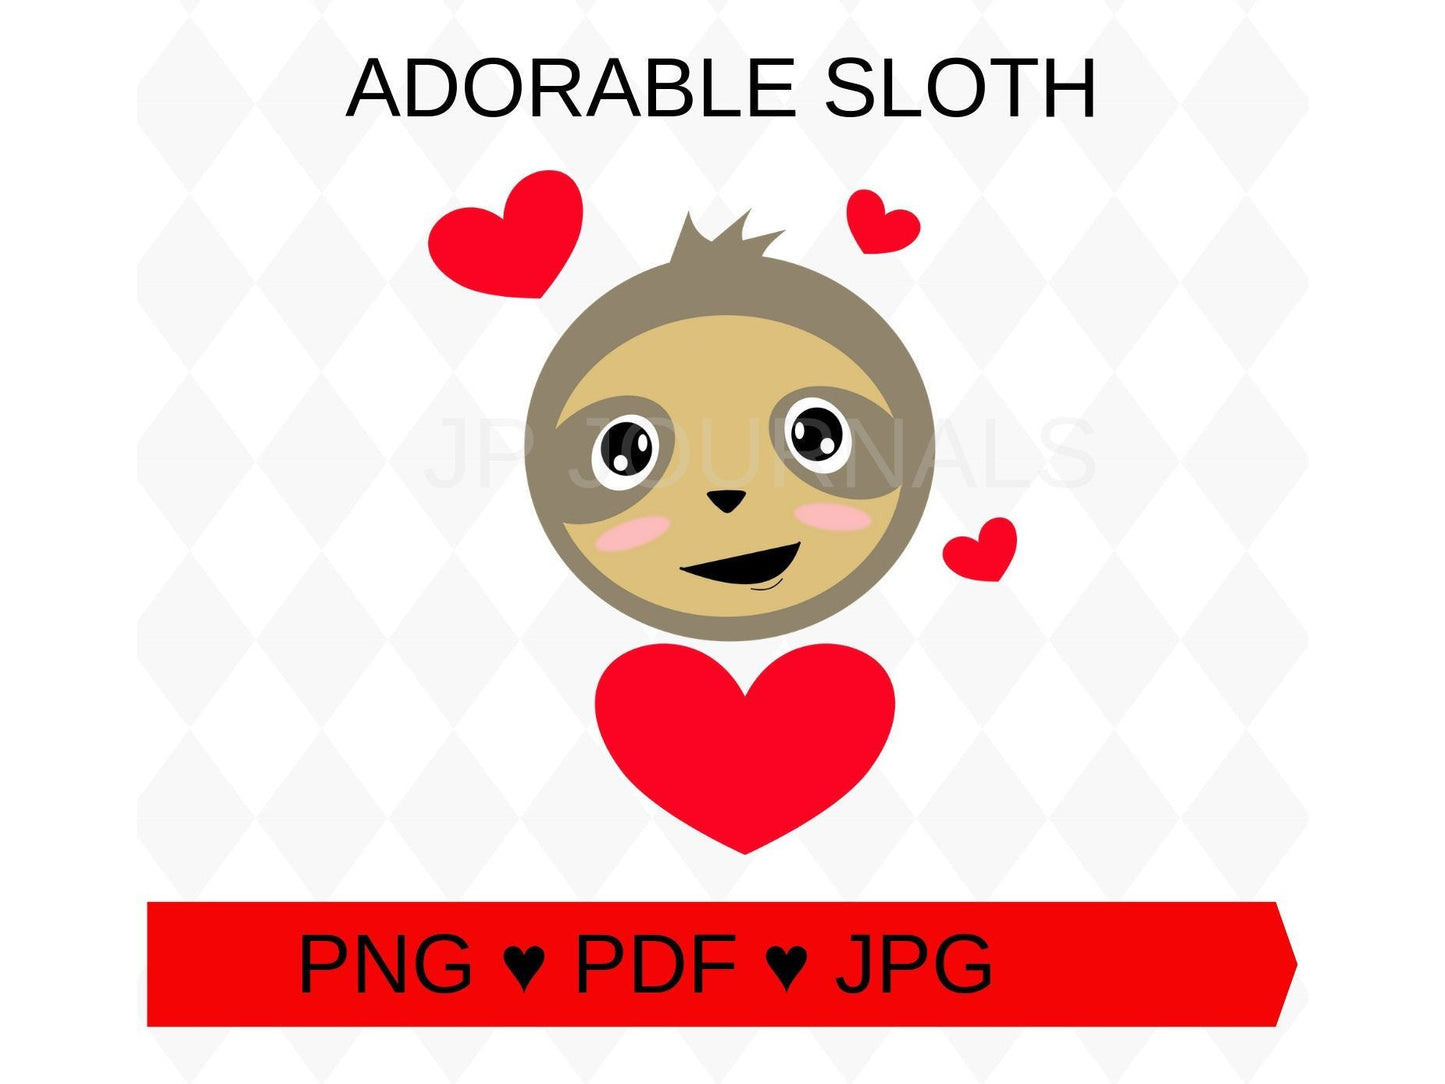 Cute Sloth Clip Art - Valentine's Day Clip Art for Sloth Lovers - INSTANT DOWNLOAD - pdf png jpg DIY Valentines Day Crafts Cards Gifts